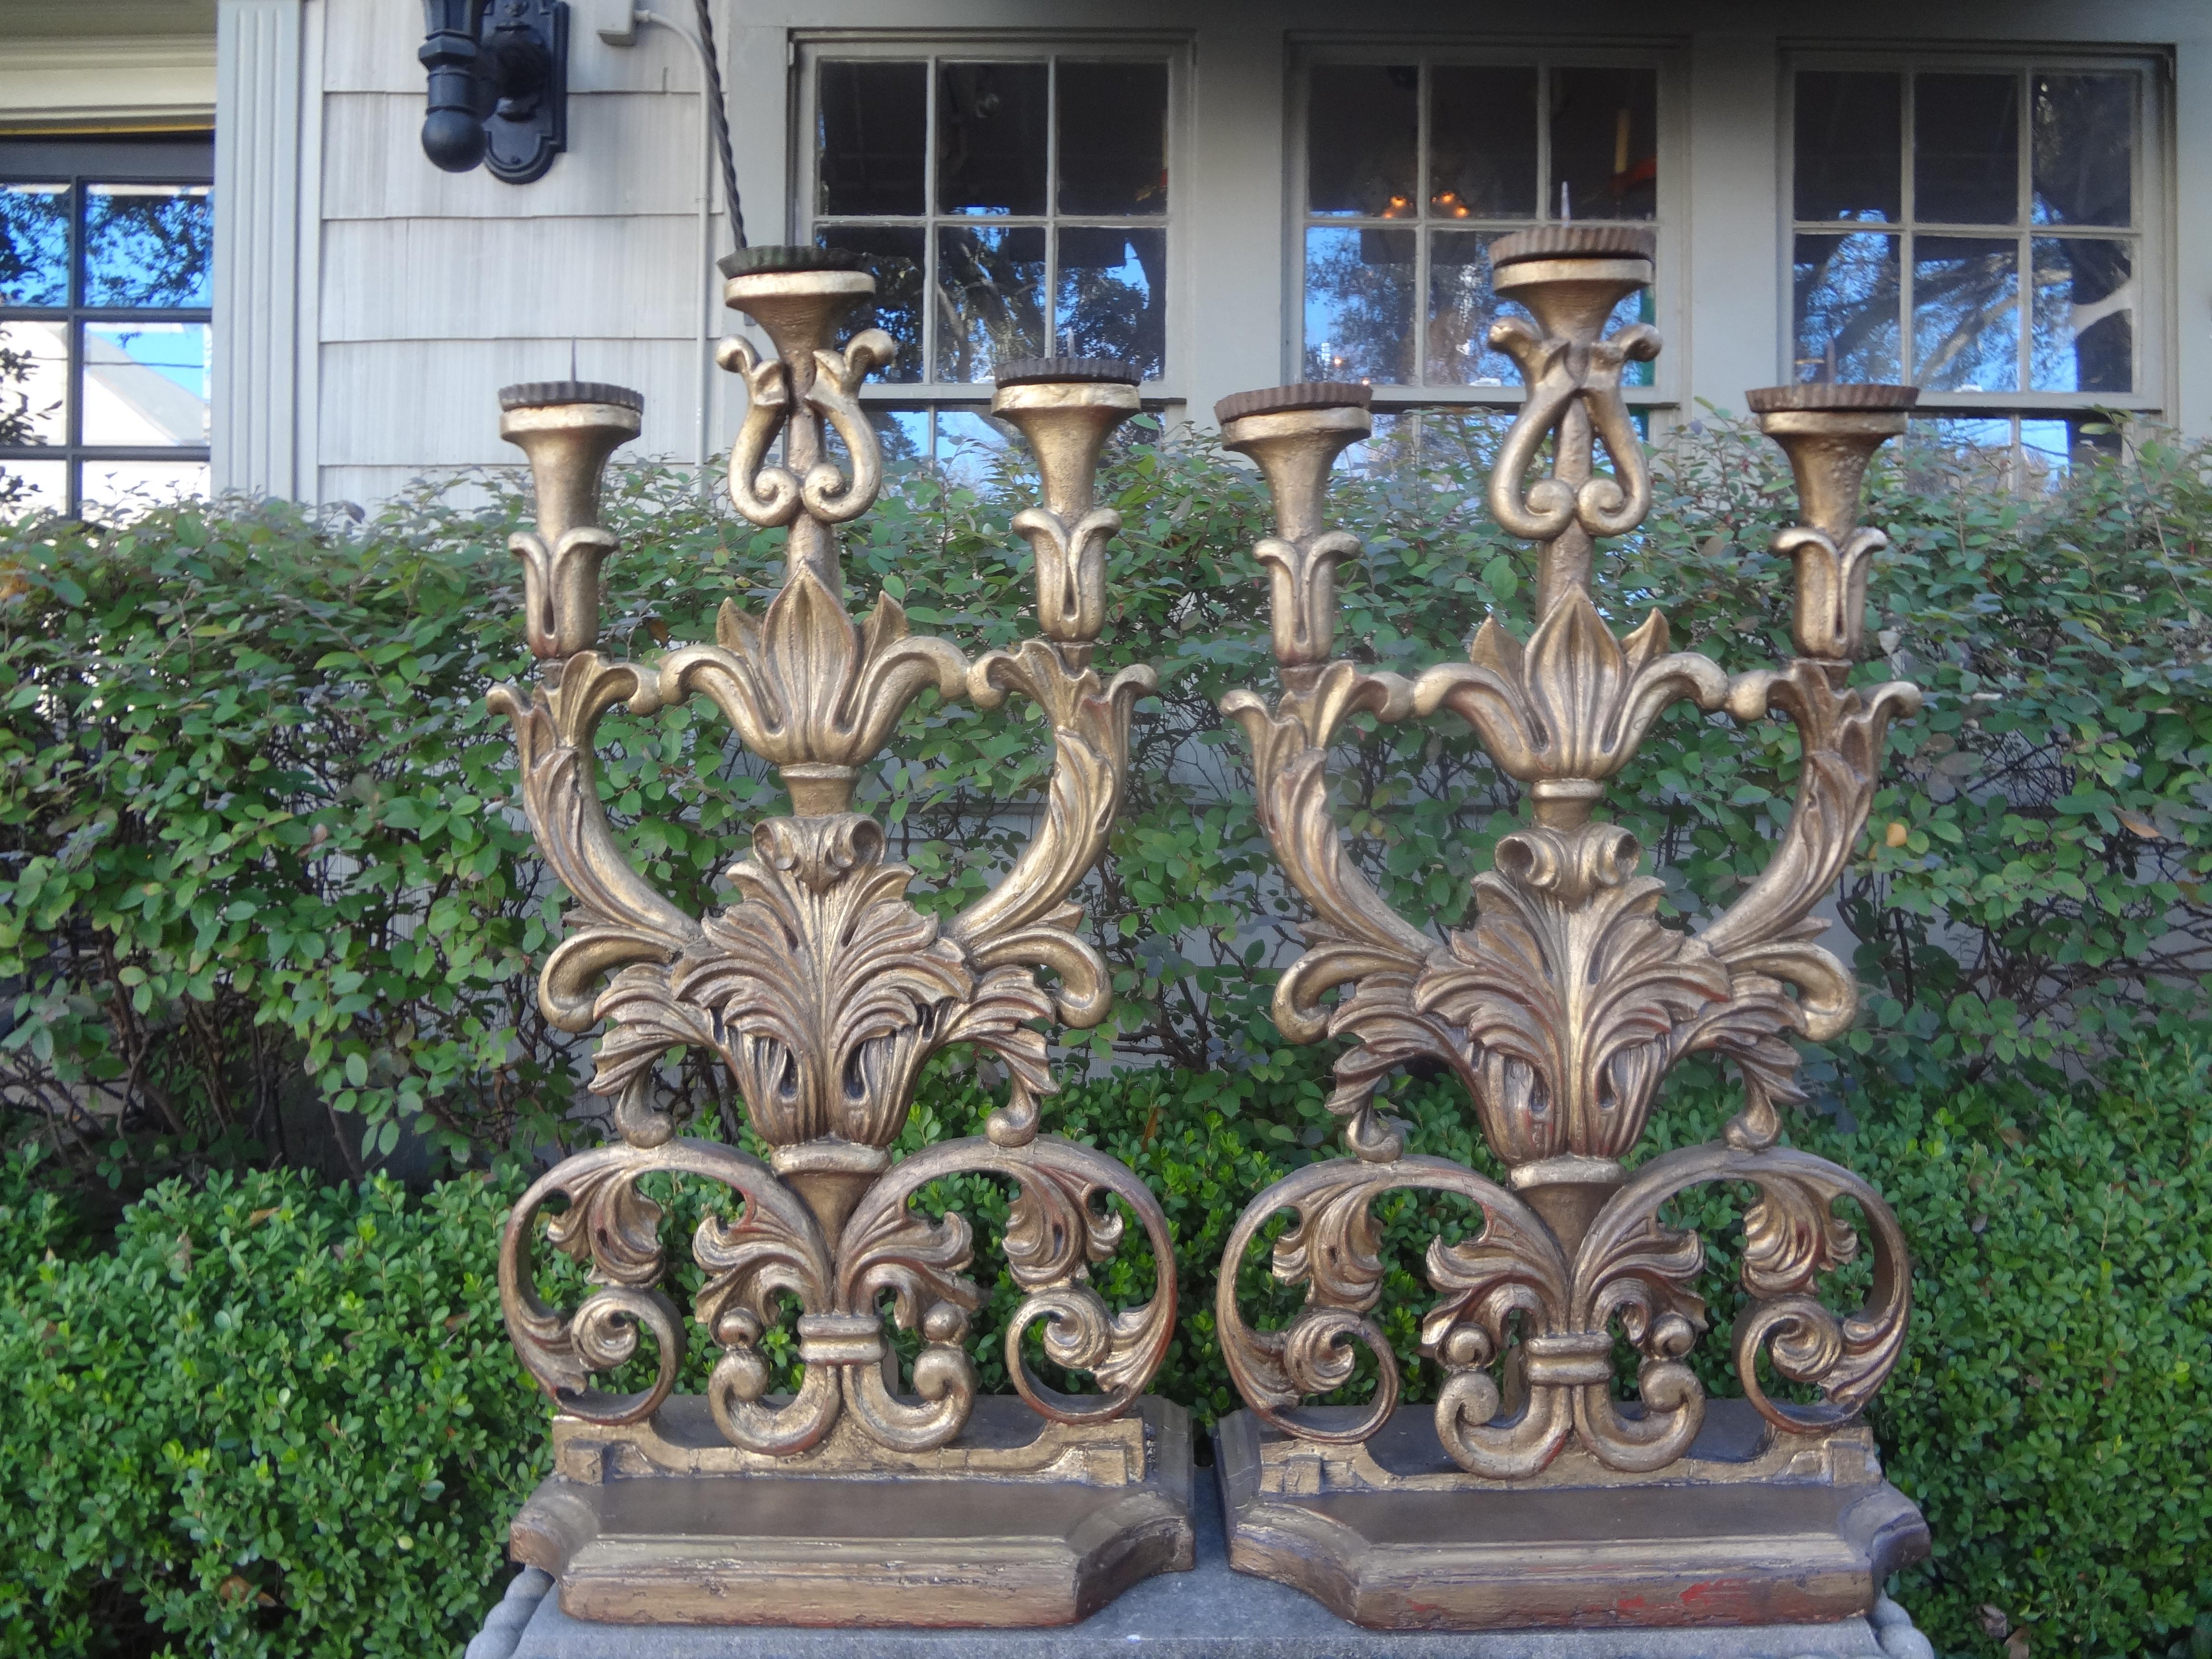 Magnificent pair of 18th century Italian Baroque giltwood altar candelabra. This stunning huge pair of Italian Baroque gilt wood pricket altar sticks, candlesticks or candleholders will be the focal point of a mantel, console table, credenza or